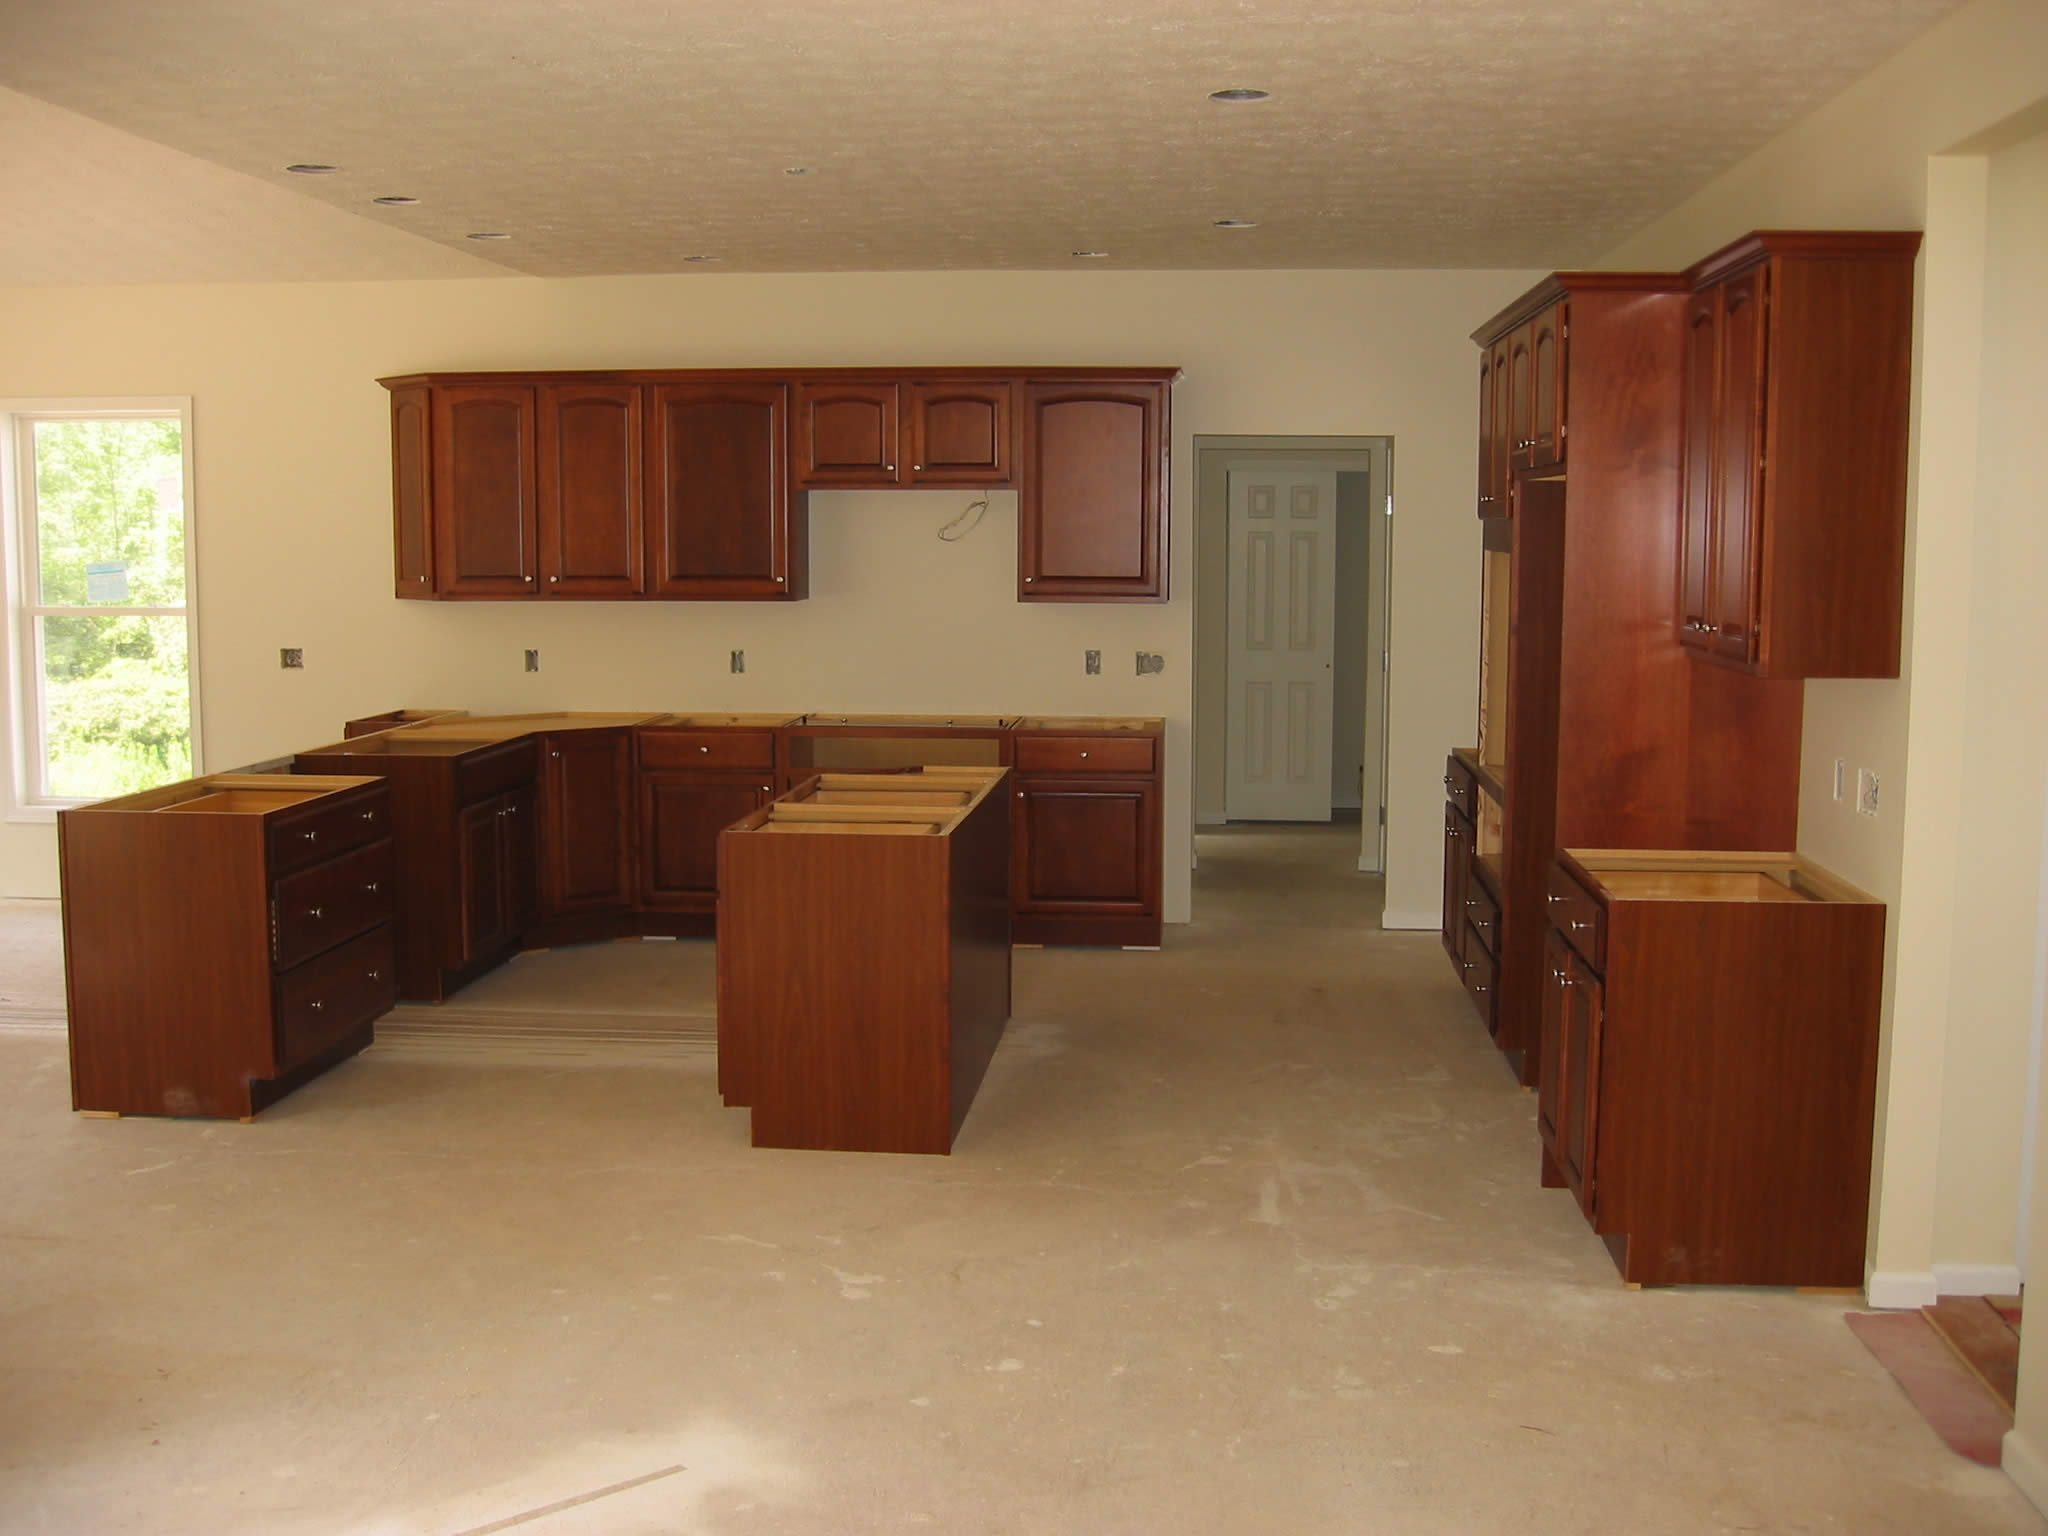 Our Kitchen Cabinets from the Family Room